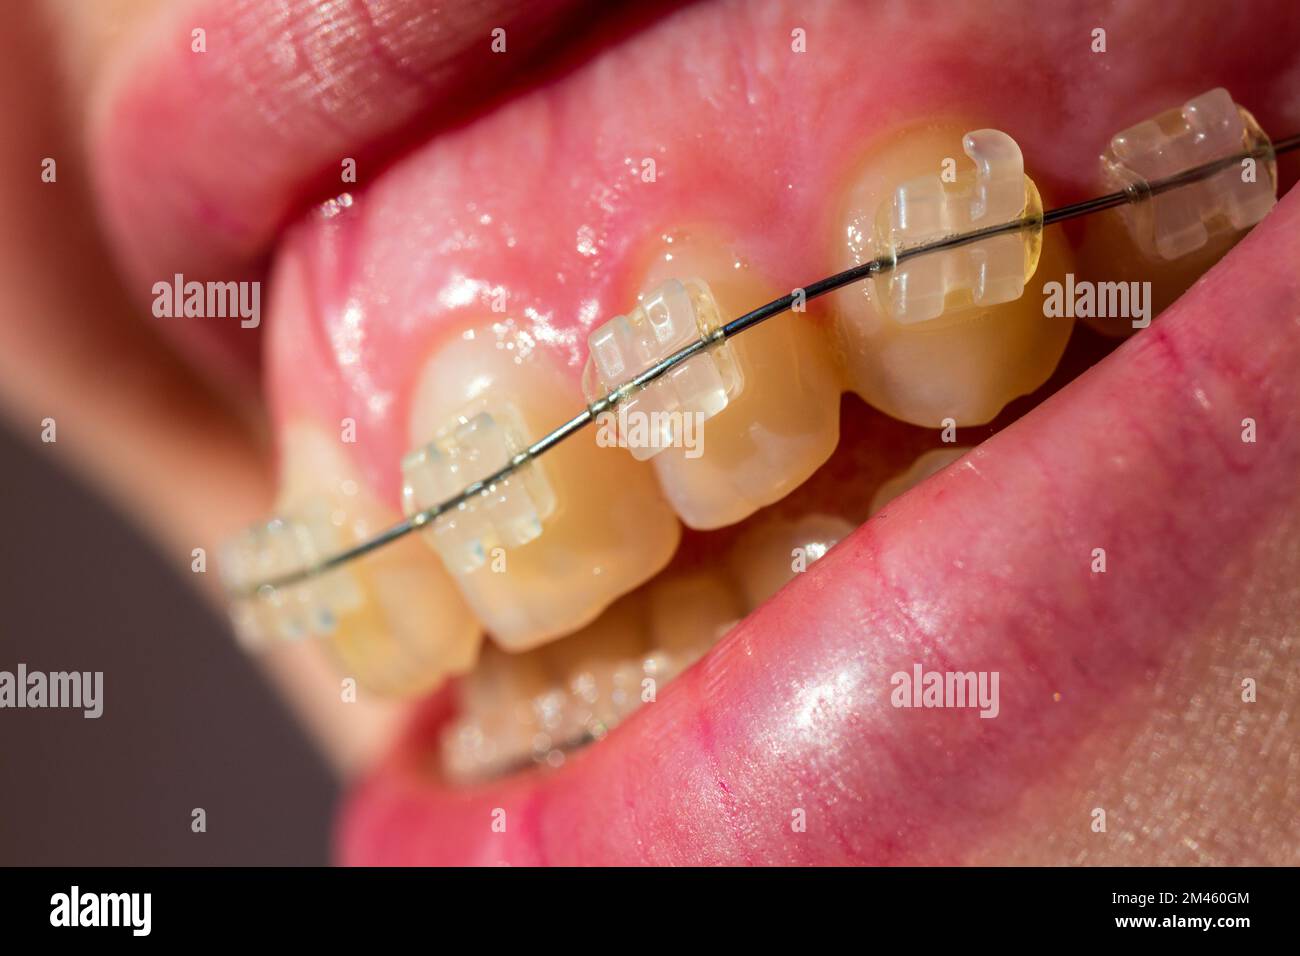 https://c8.alamy.com/comp/2M460GM/close-up-of-young-woman-mouth-fixed-braces-with-ceramic-brackets-2M460GM.jpg